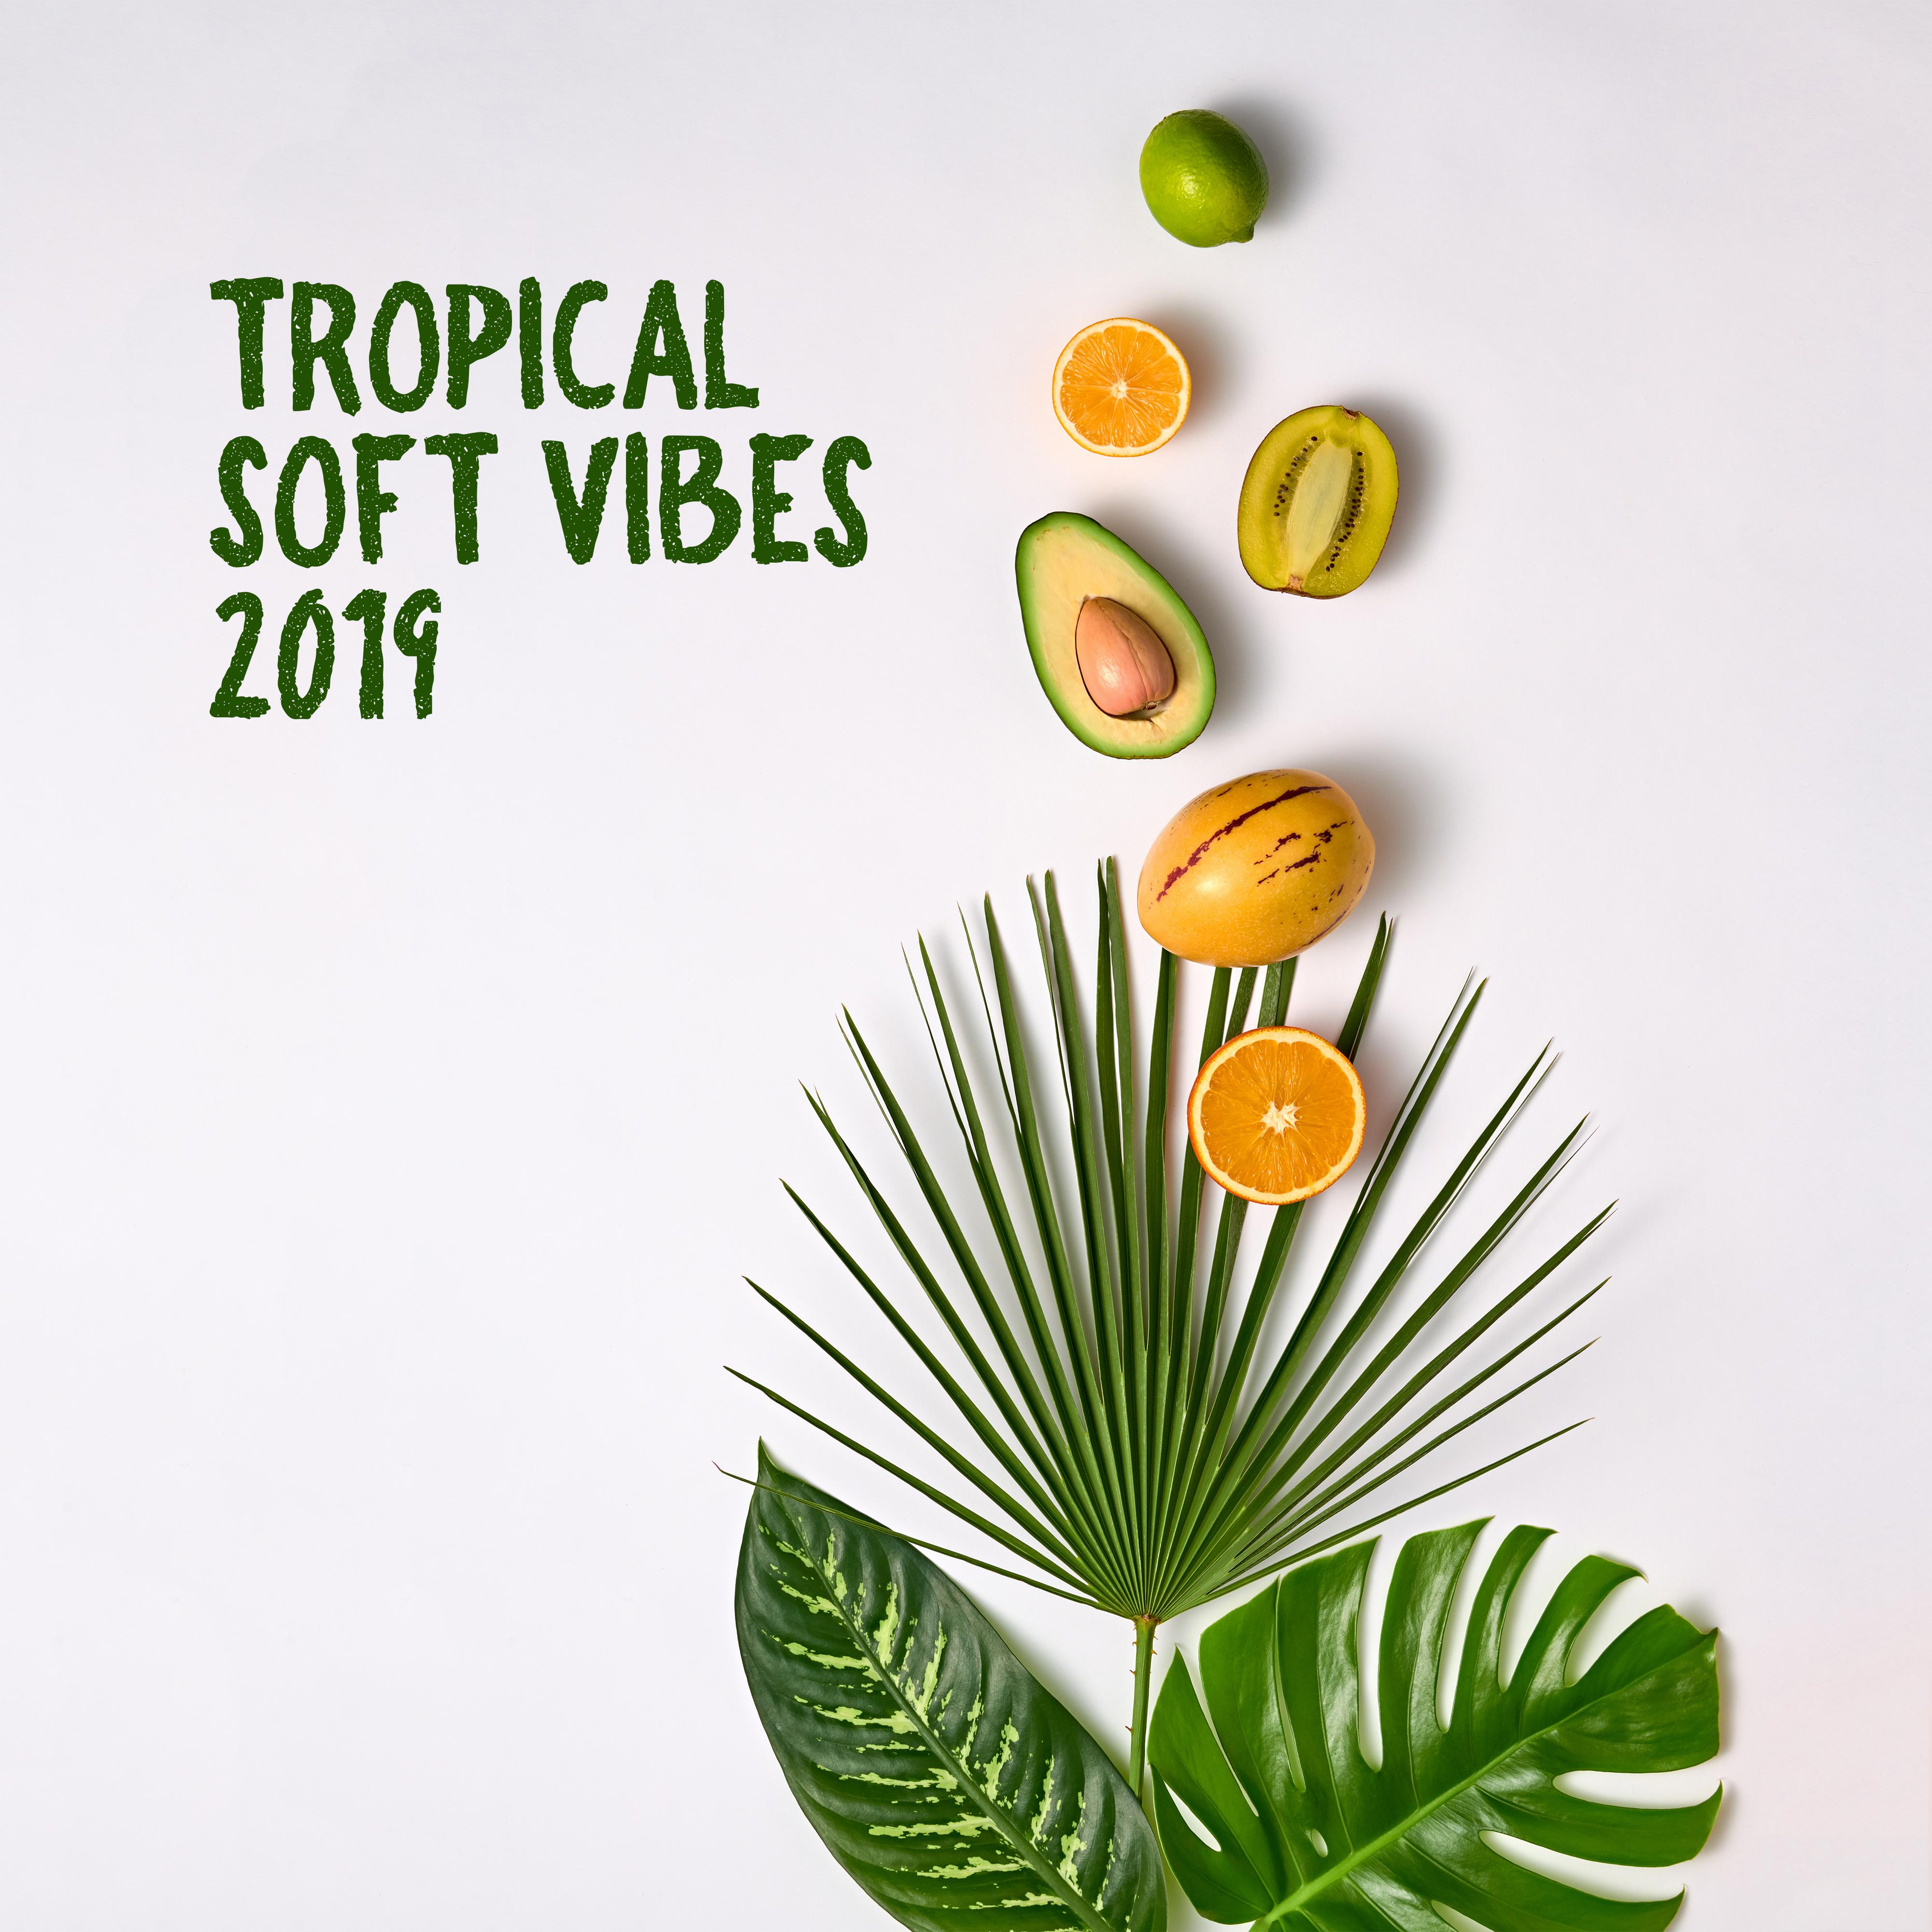 Tropical Soft Vibes 2019 – Ibiza Chill Out, Beach Music, Summer Chill 2019, **** Vibes, Relax Zone